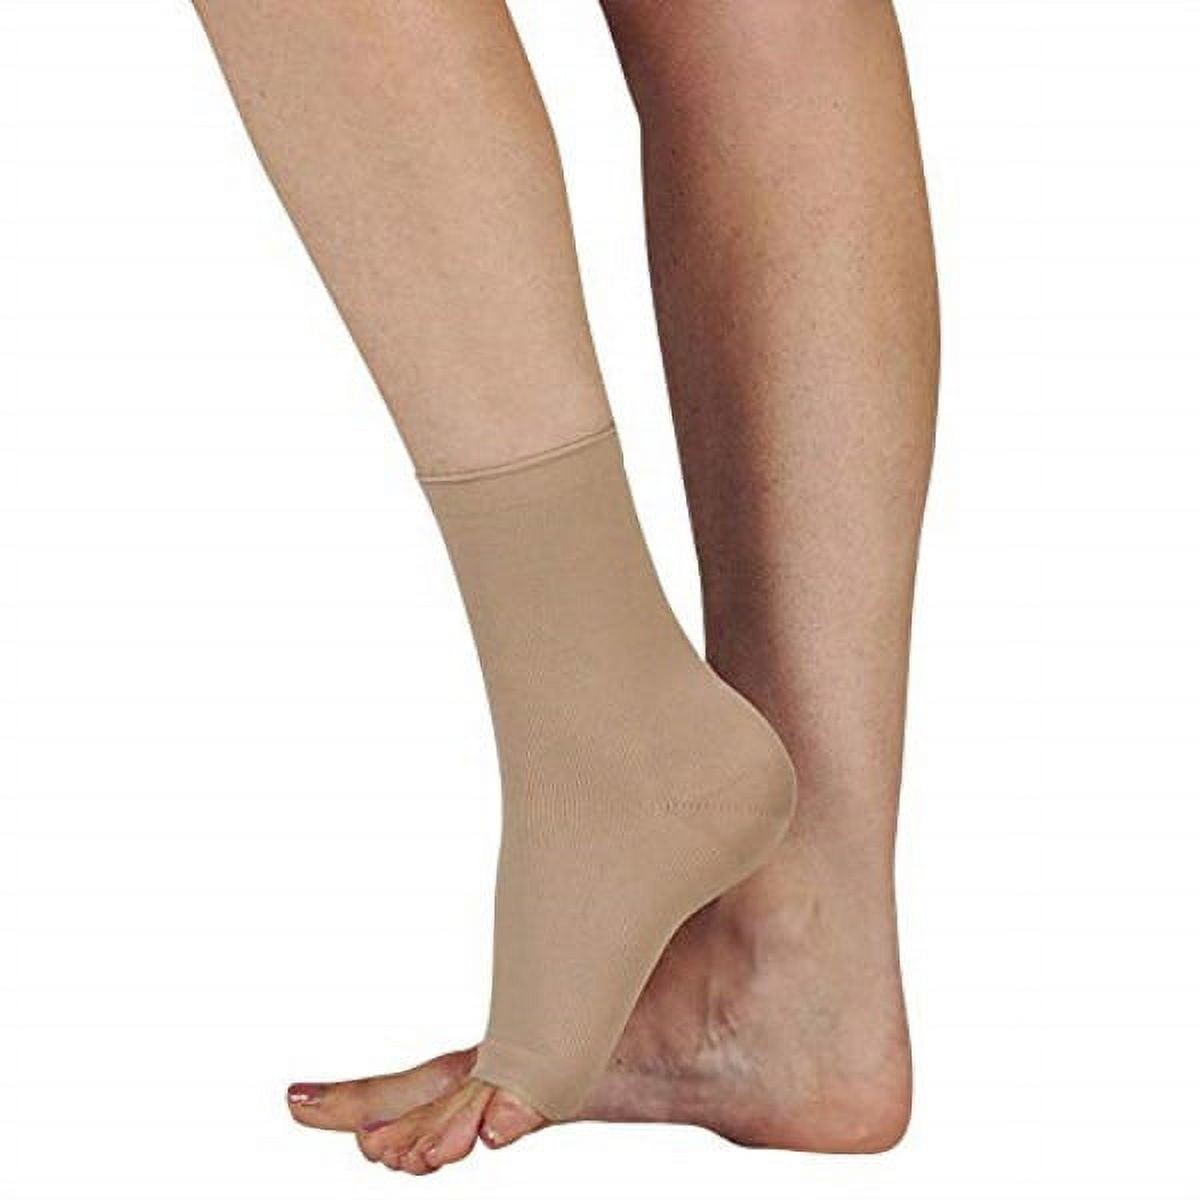 Stocking Donner Compression Stockings